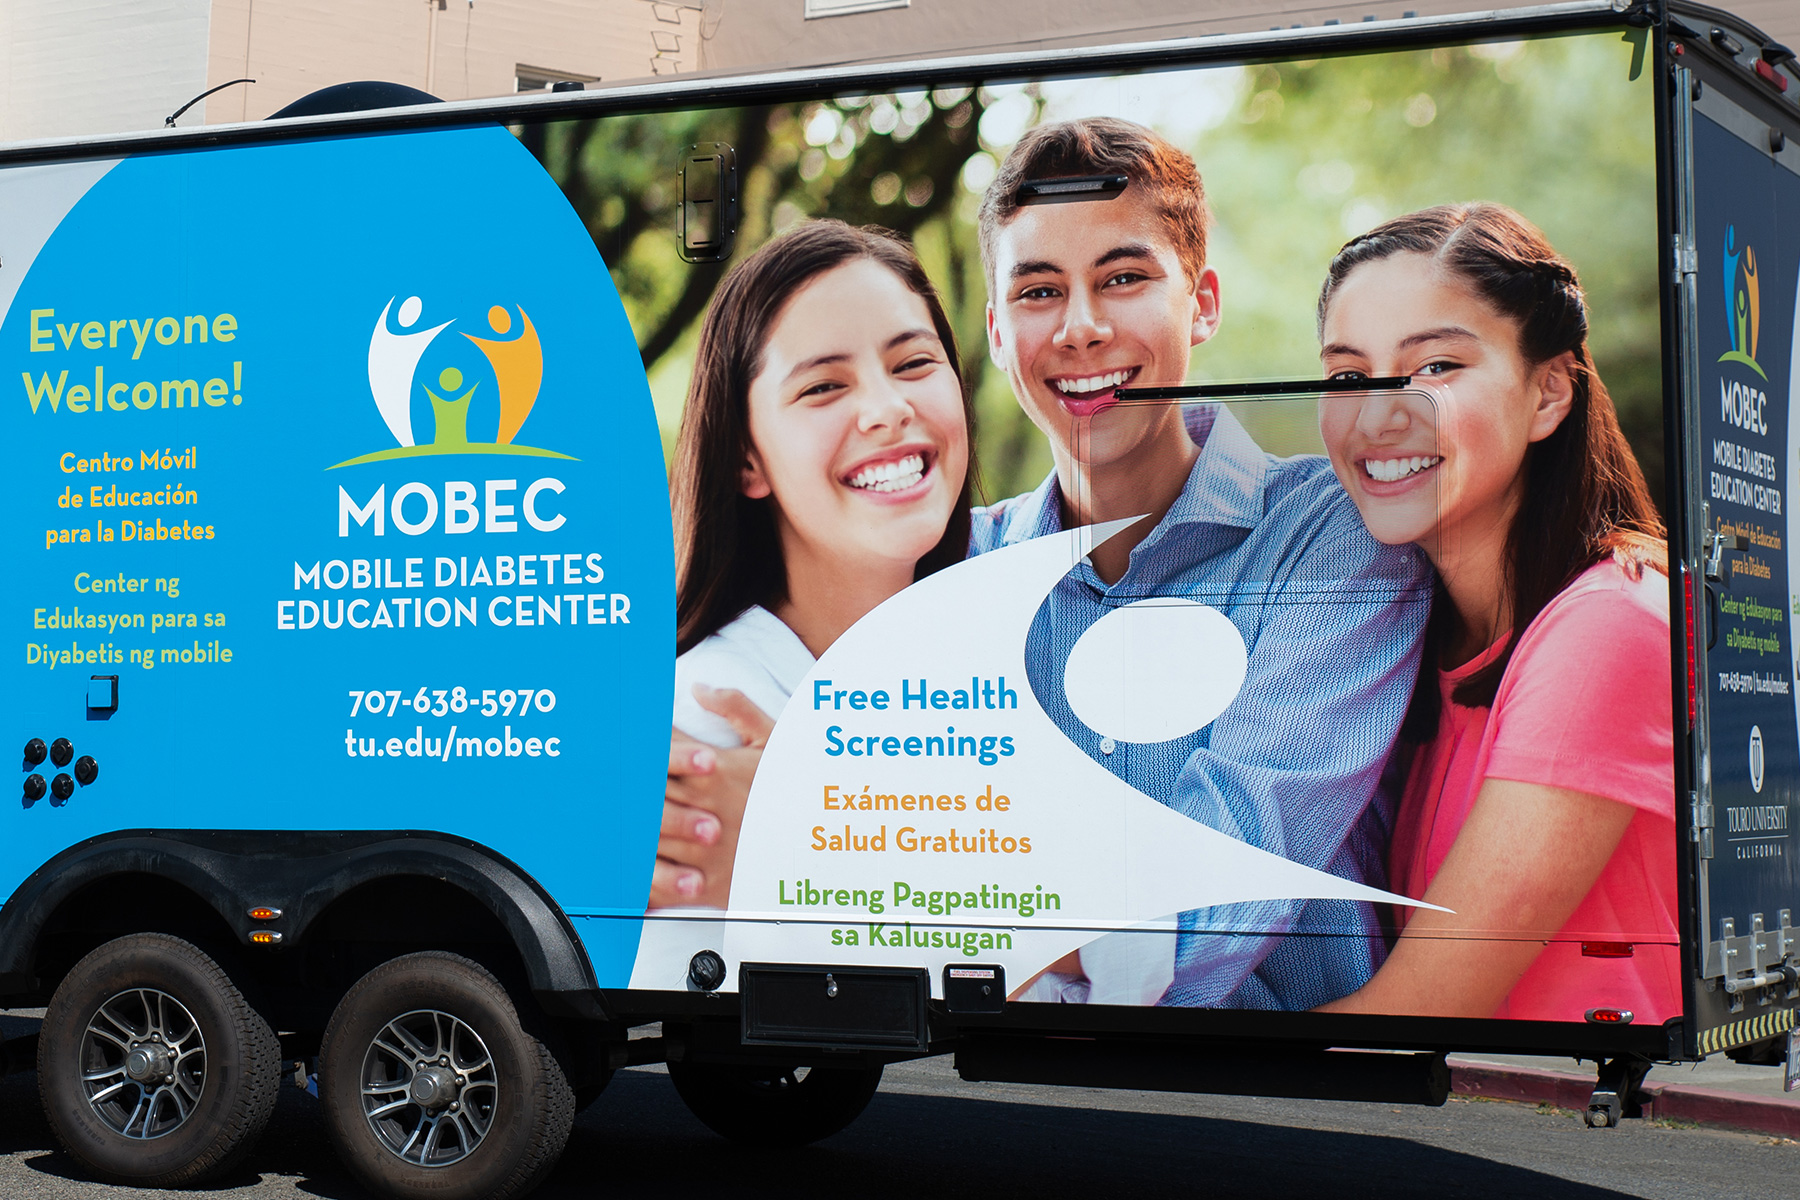 bus with mobec logo and images of two women and a man, and a man woman and child